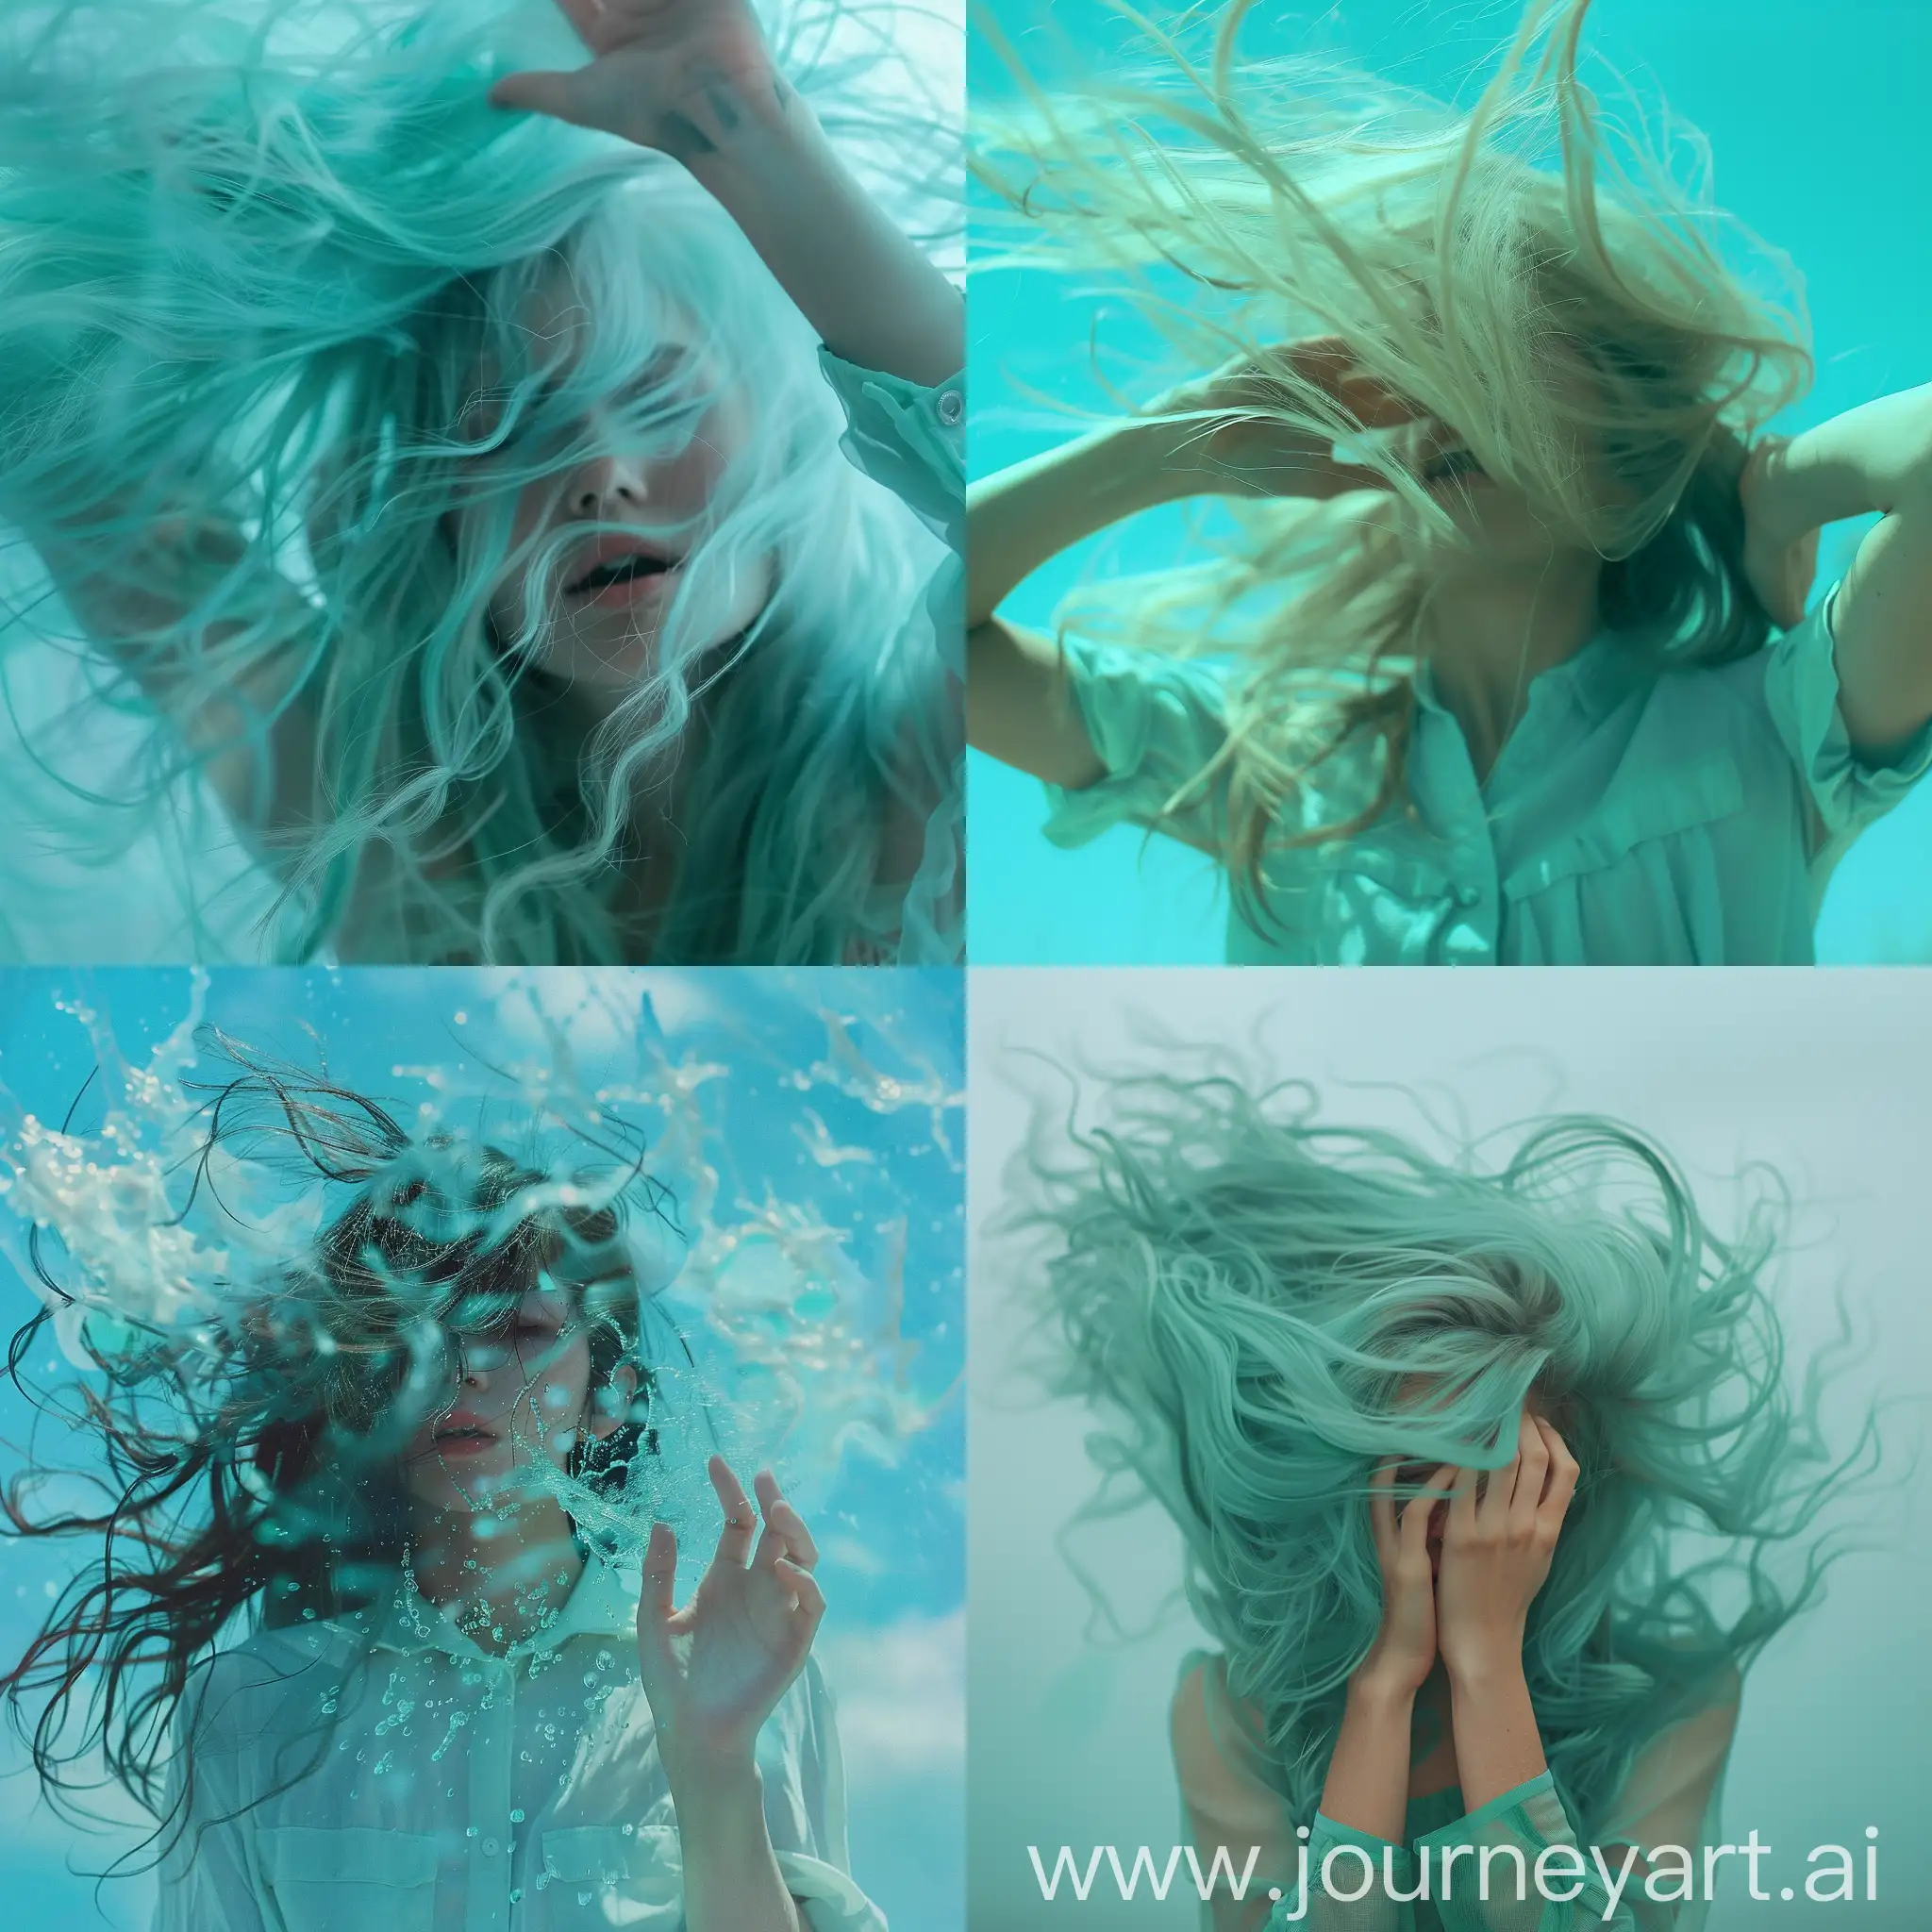 Graceful-Girl-with-Flowing-Minty-Blue-Hair-in-Windy-Atmosphere